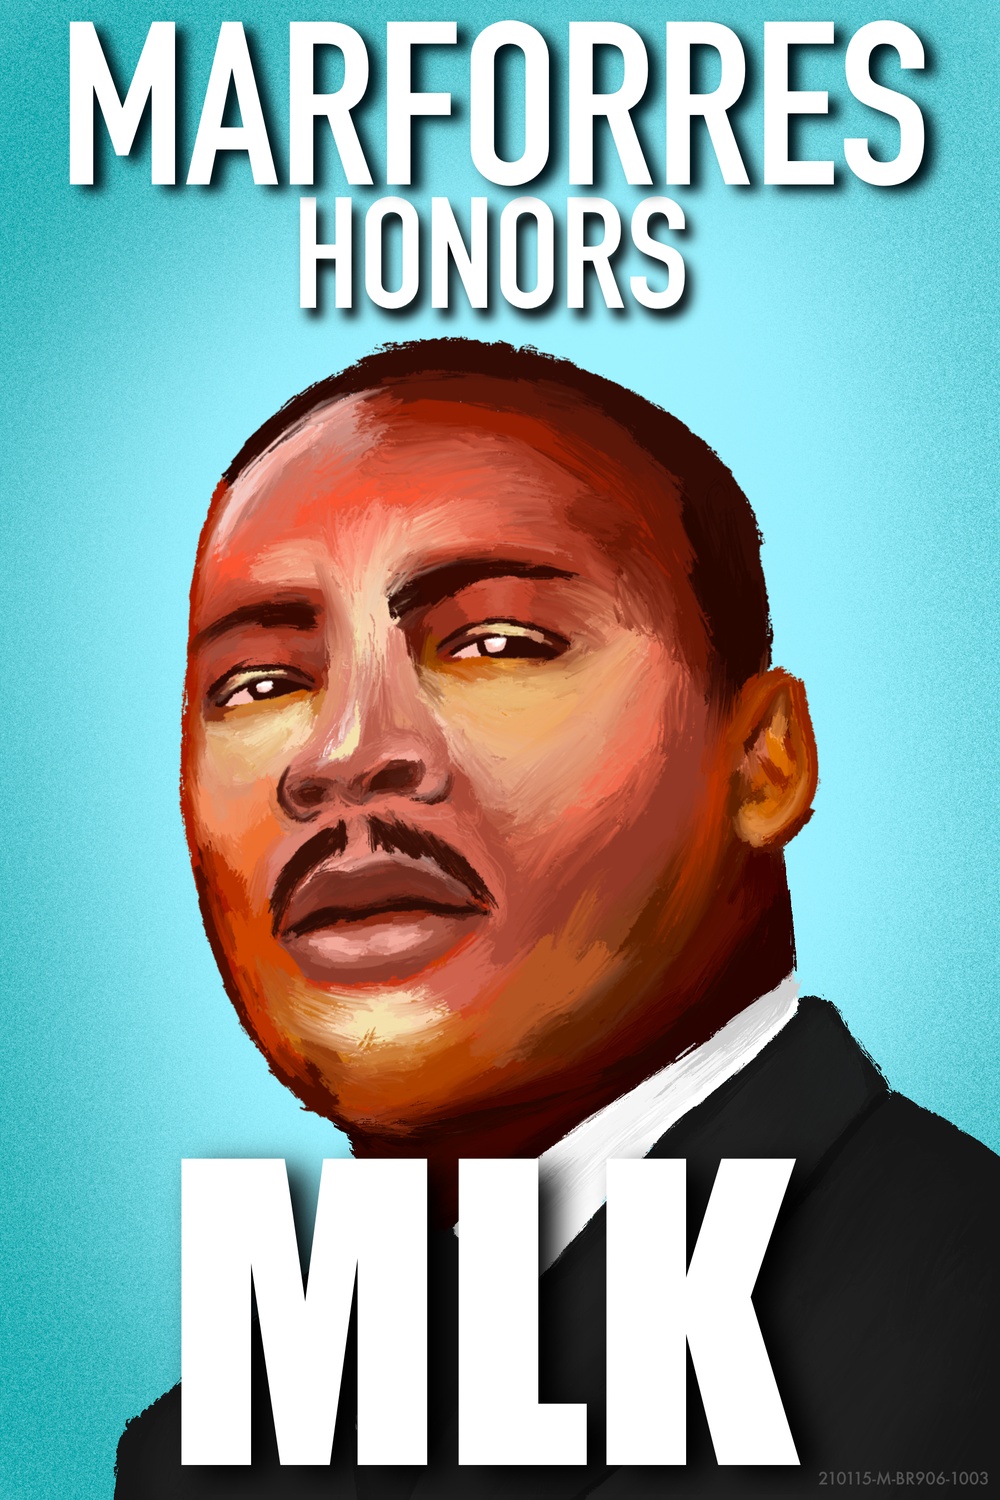 Martin Luther King Day 2021